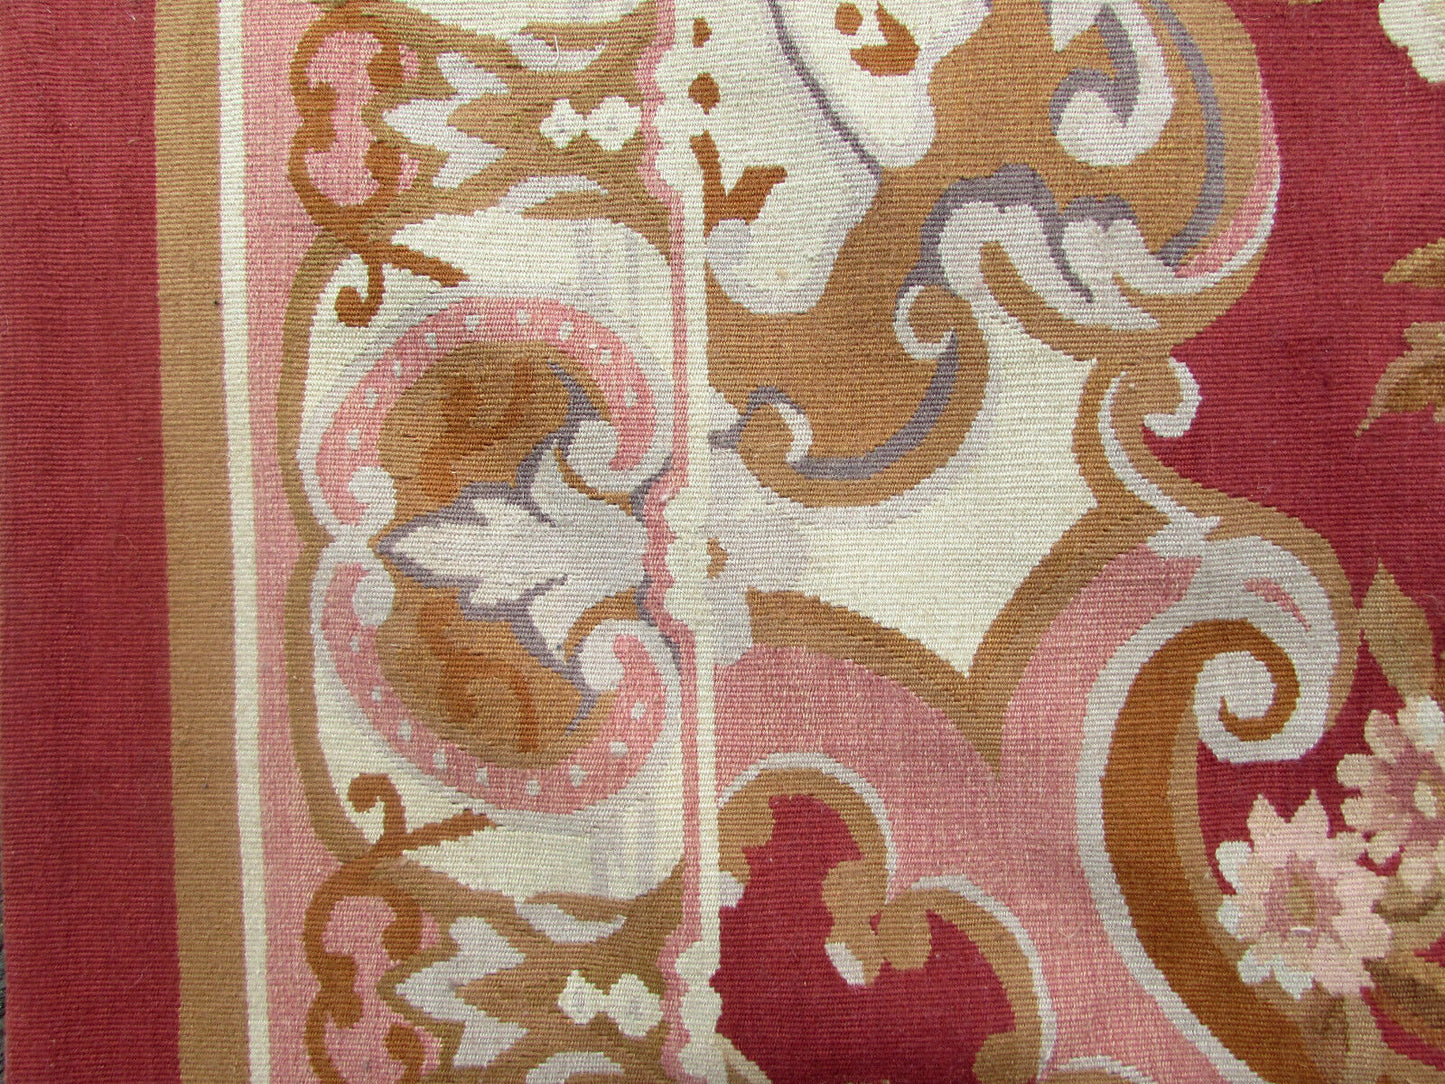 Fine craftsmanship and attention to detail showcased in a close-up of the Aubusson Rug's weaving technique